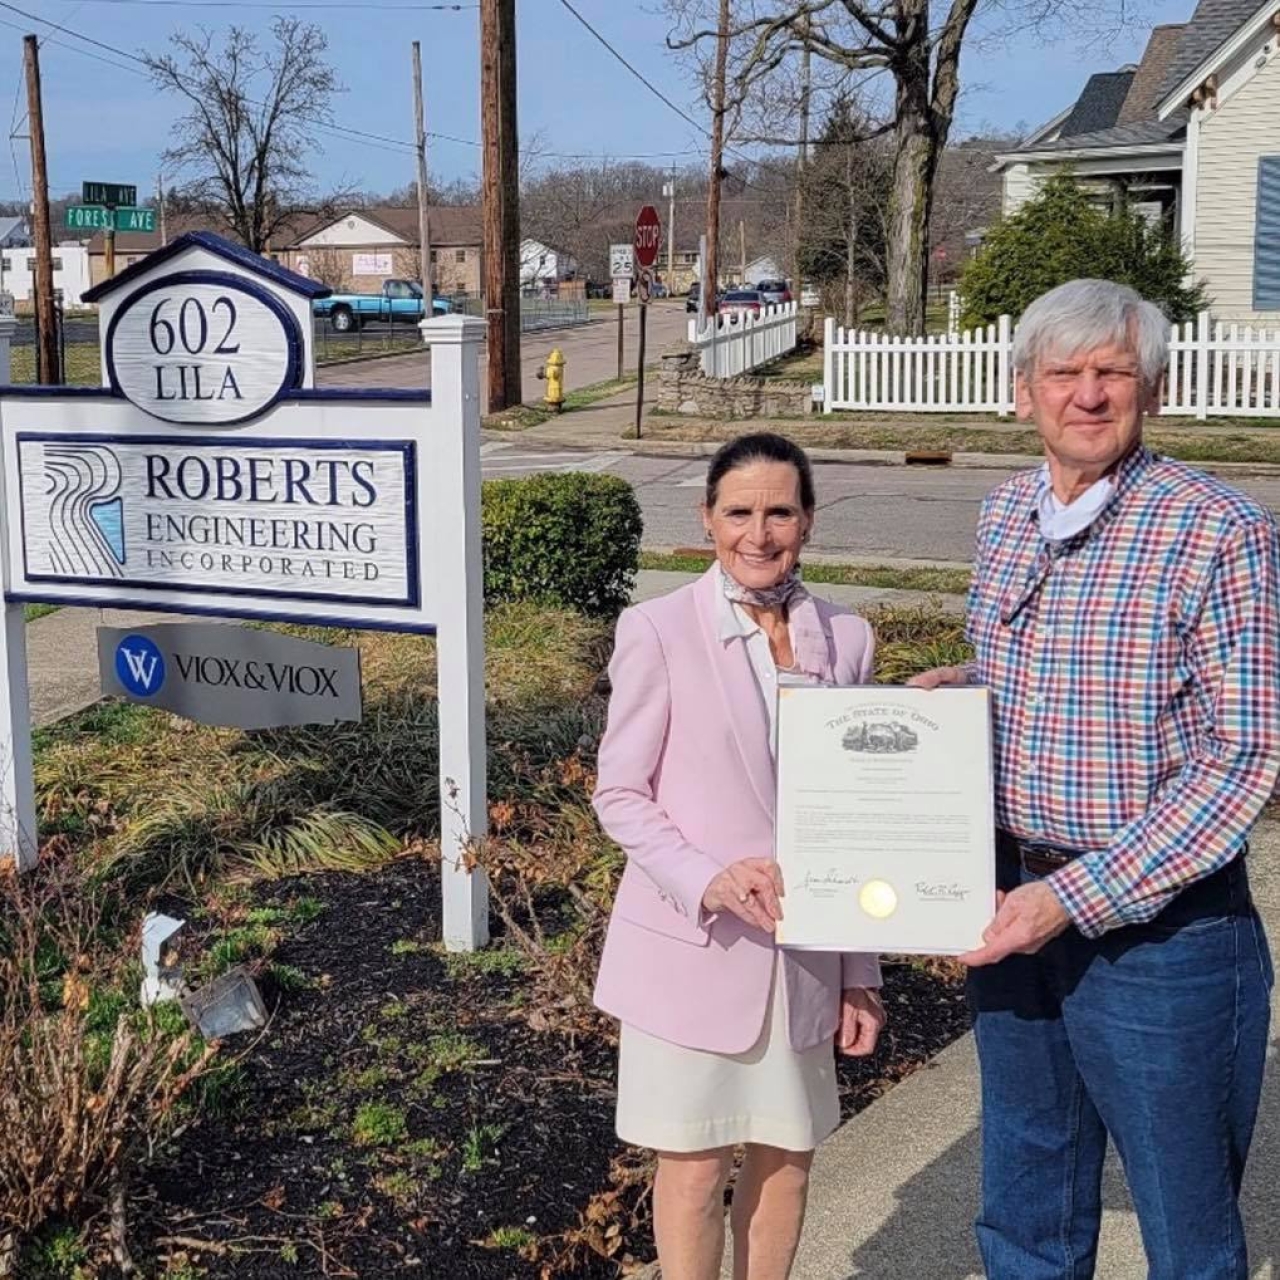 Rep. Schmidt presents a commendation to Roberts Engineering in Milford on the occasion of their 30th year in business.